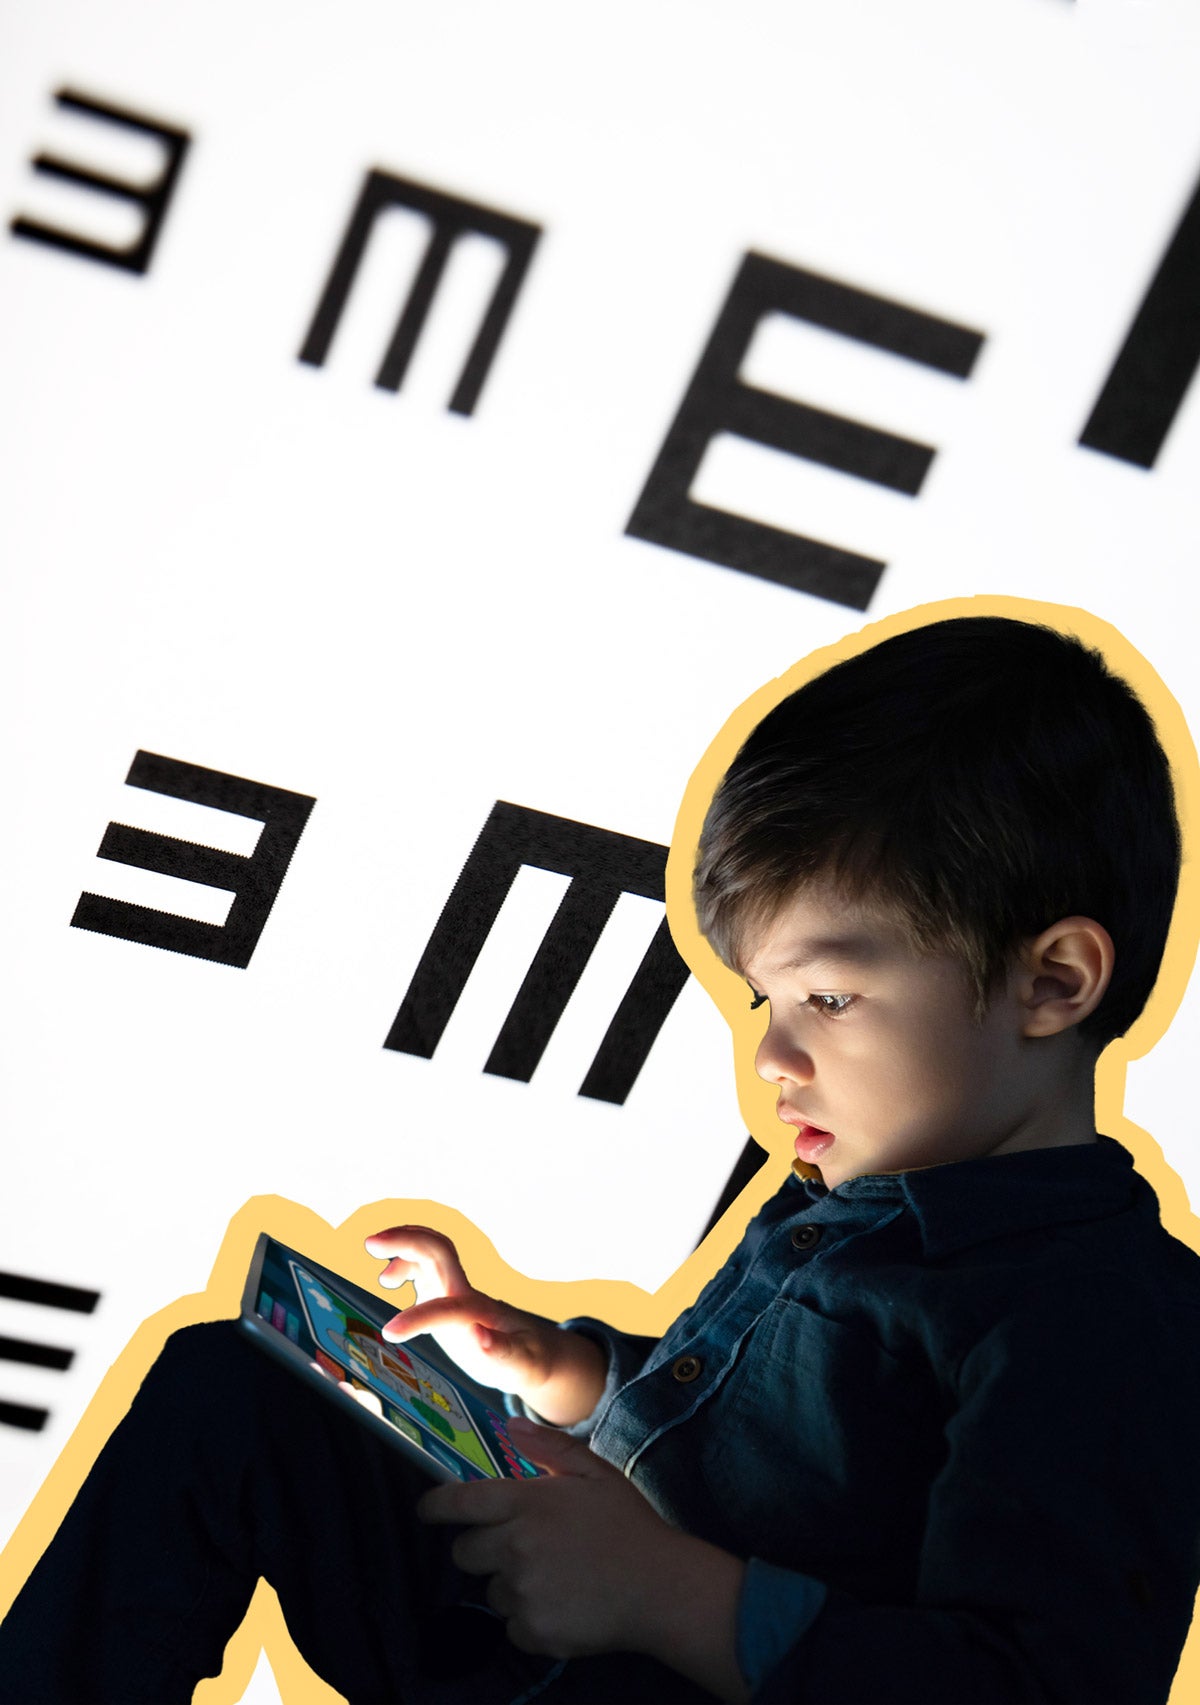 Photo illo: A young boy sits and plays with a glowing tablet. Behind him is an oversized eye chart that blurs on the sides.